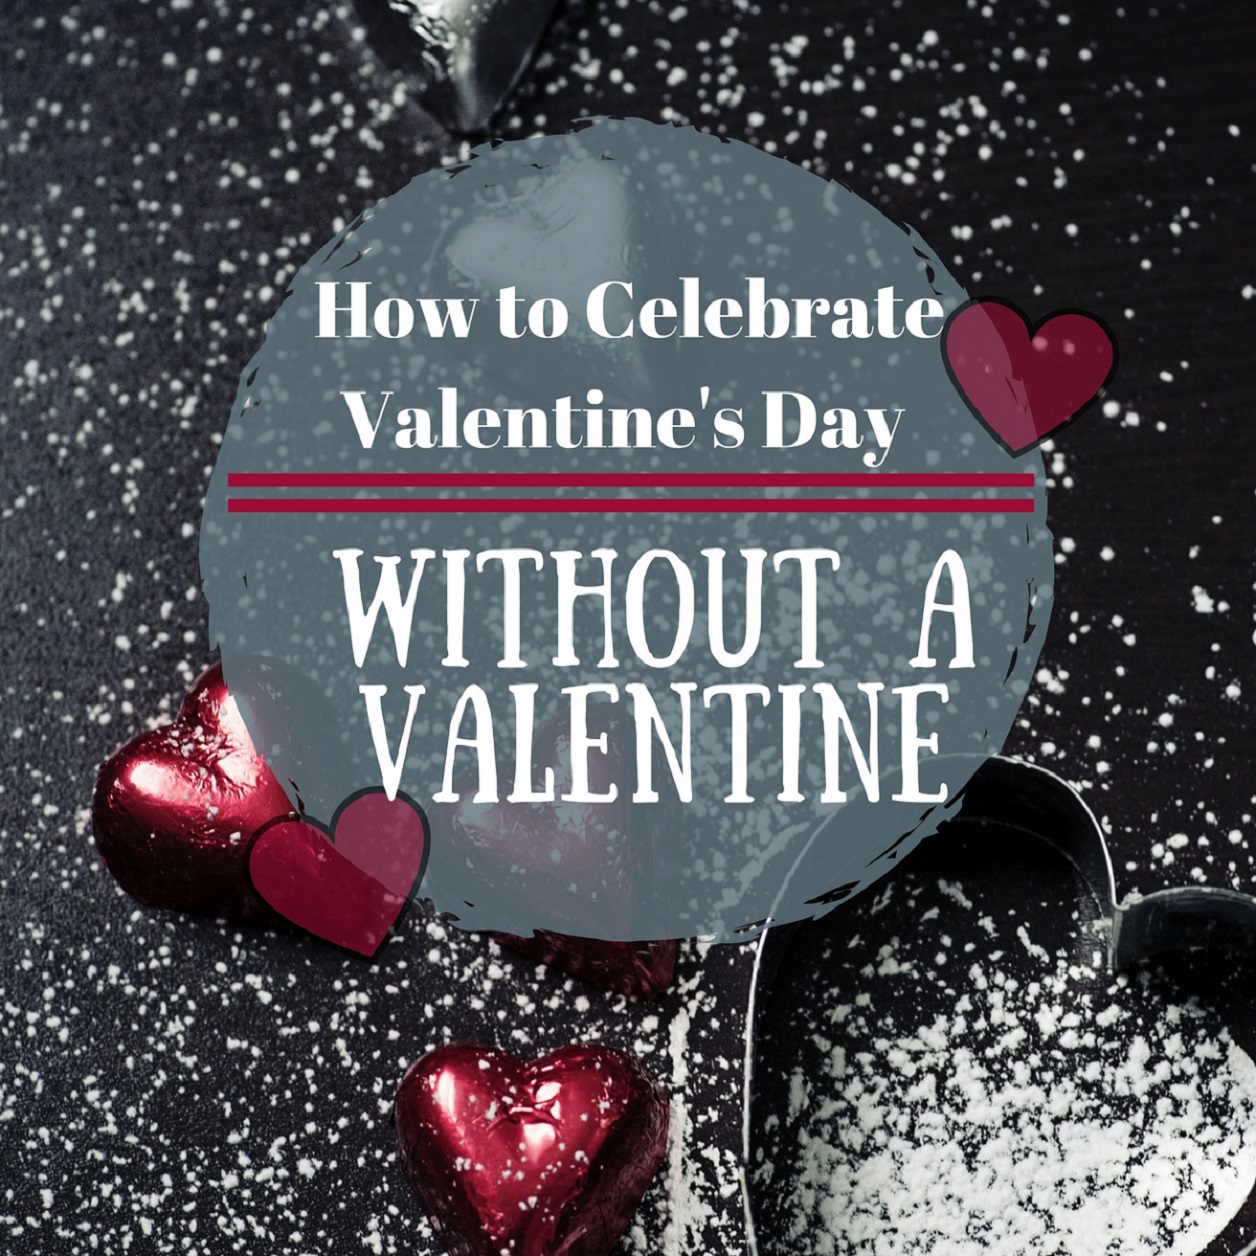 How to Celebrate Valentine’s Day Without a Valentine